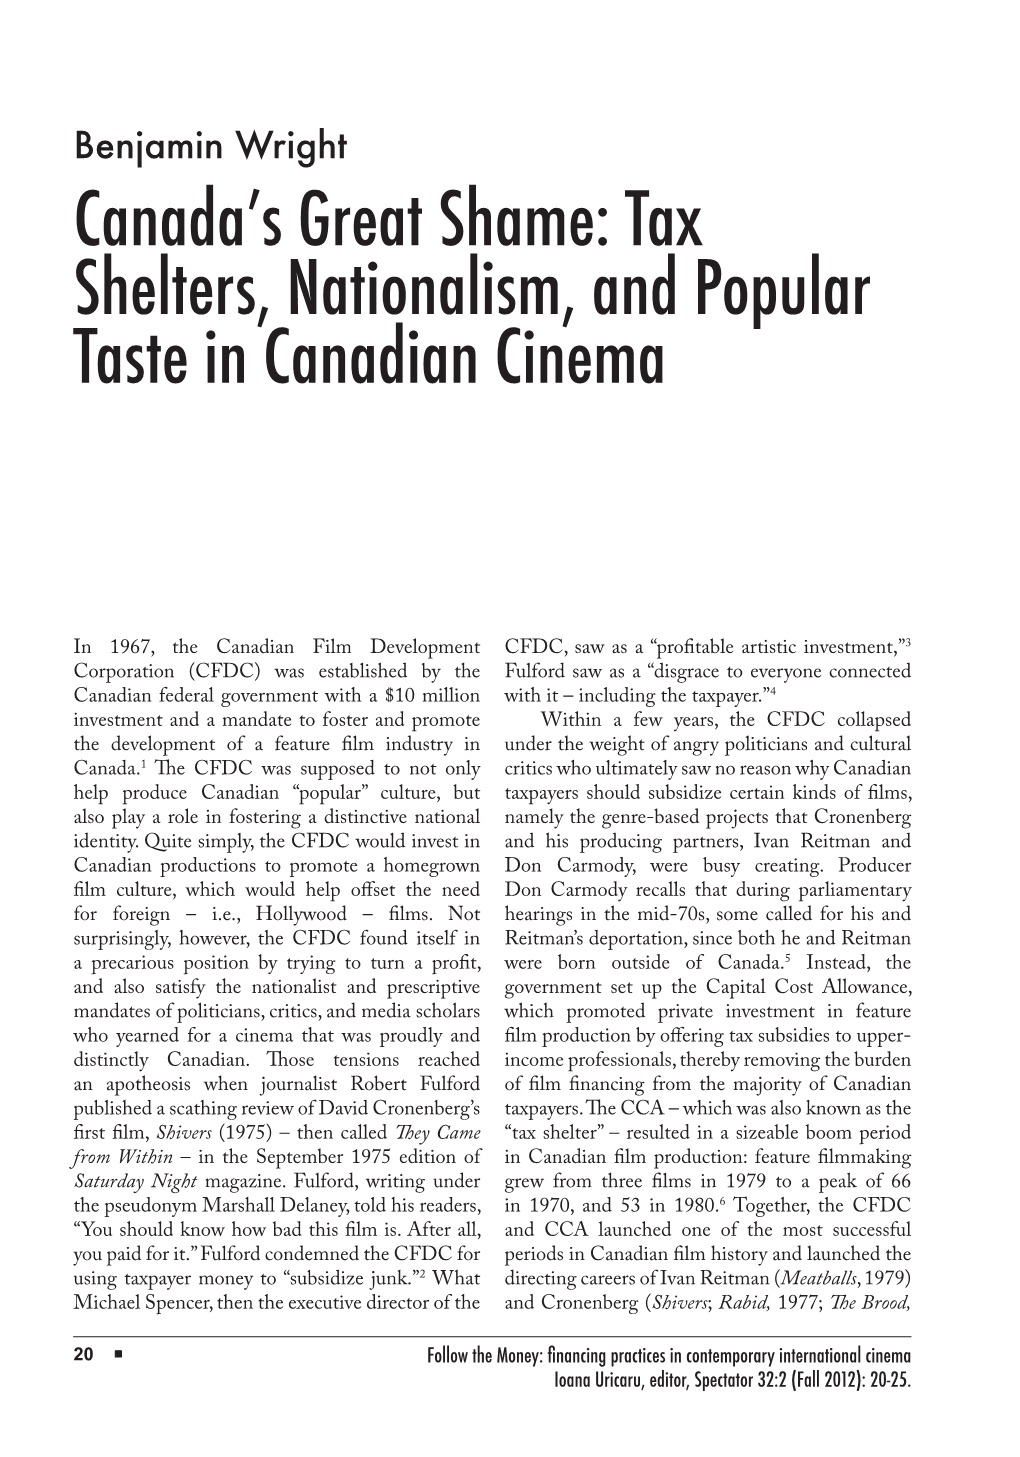 Tax Shelters, Nationalism, and Popular Taste in Canadian Cinema